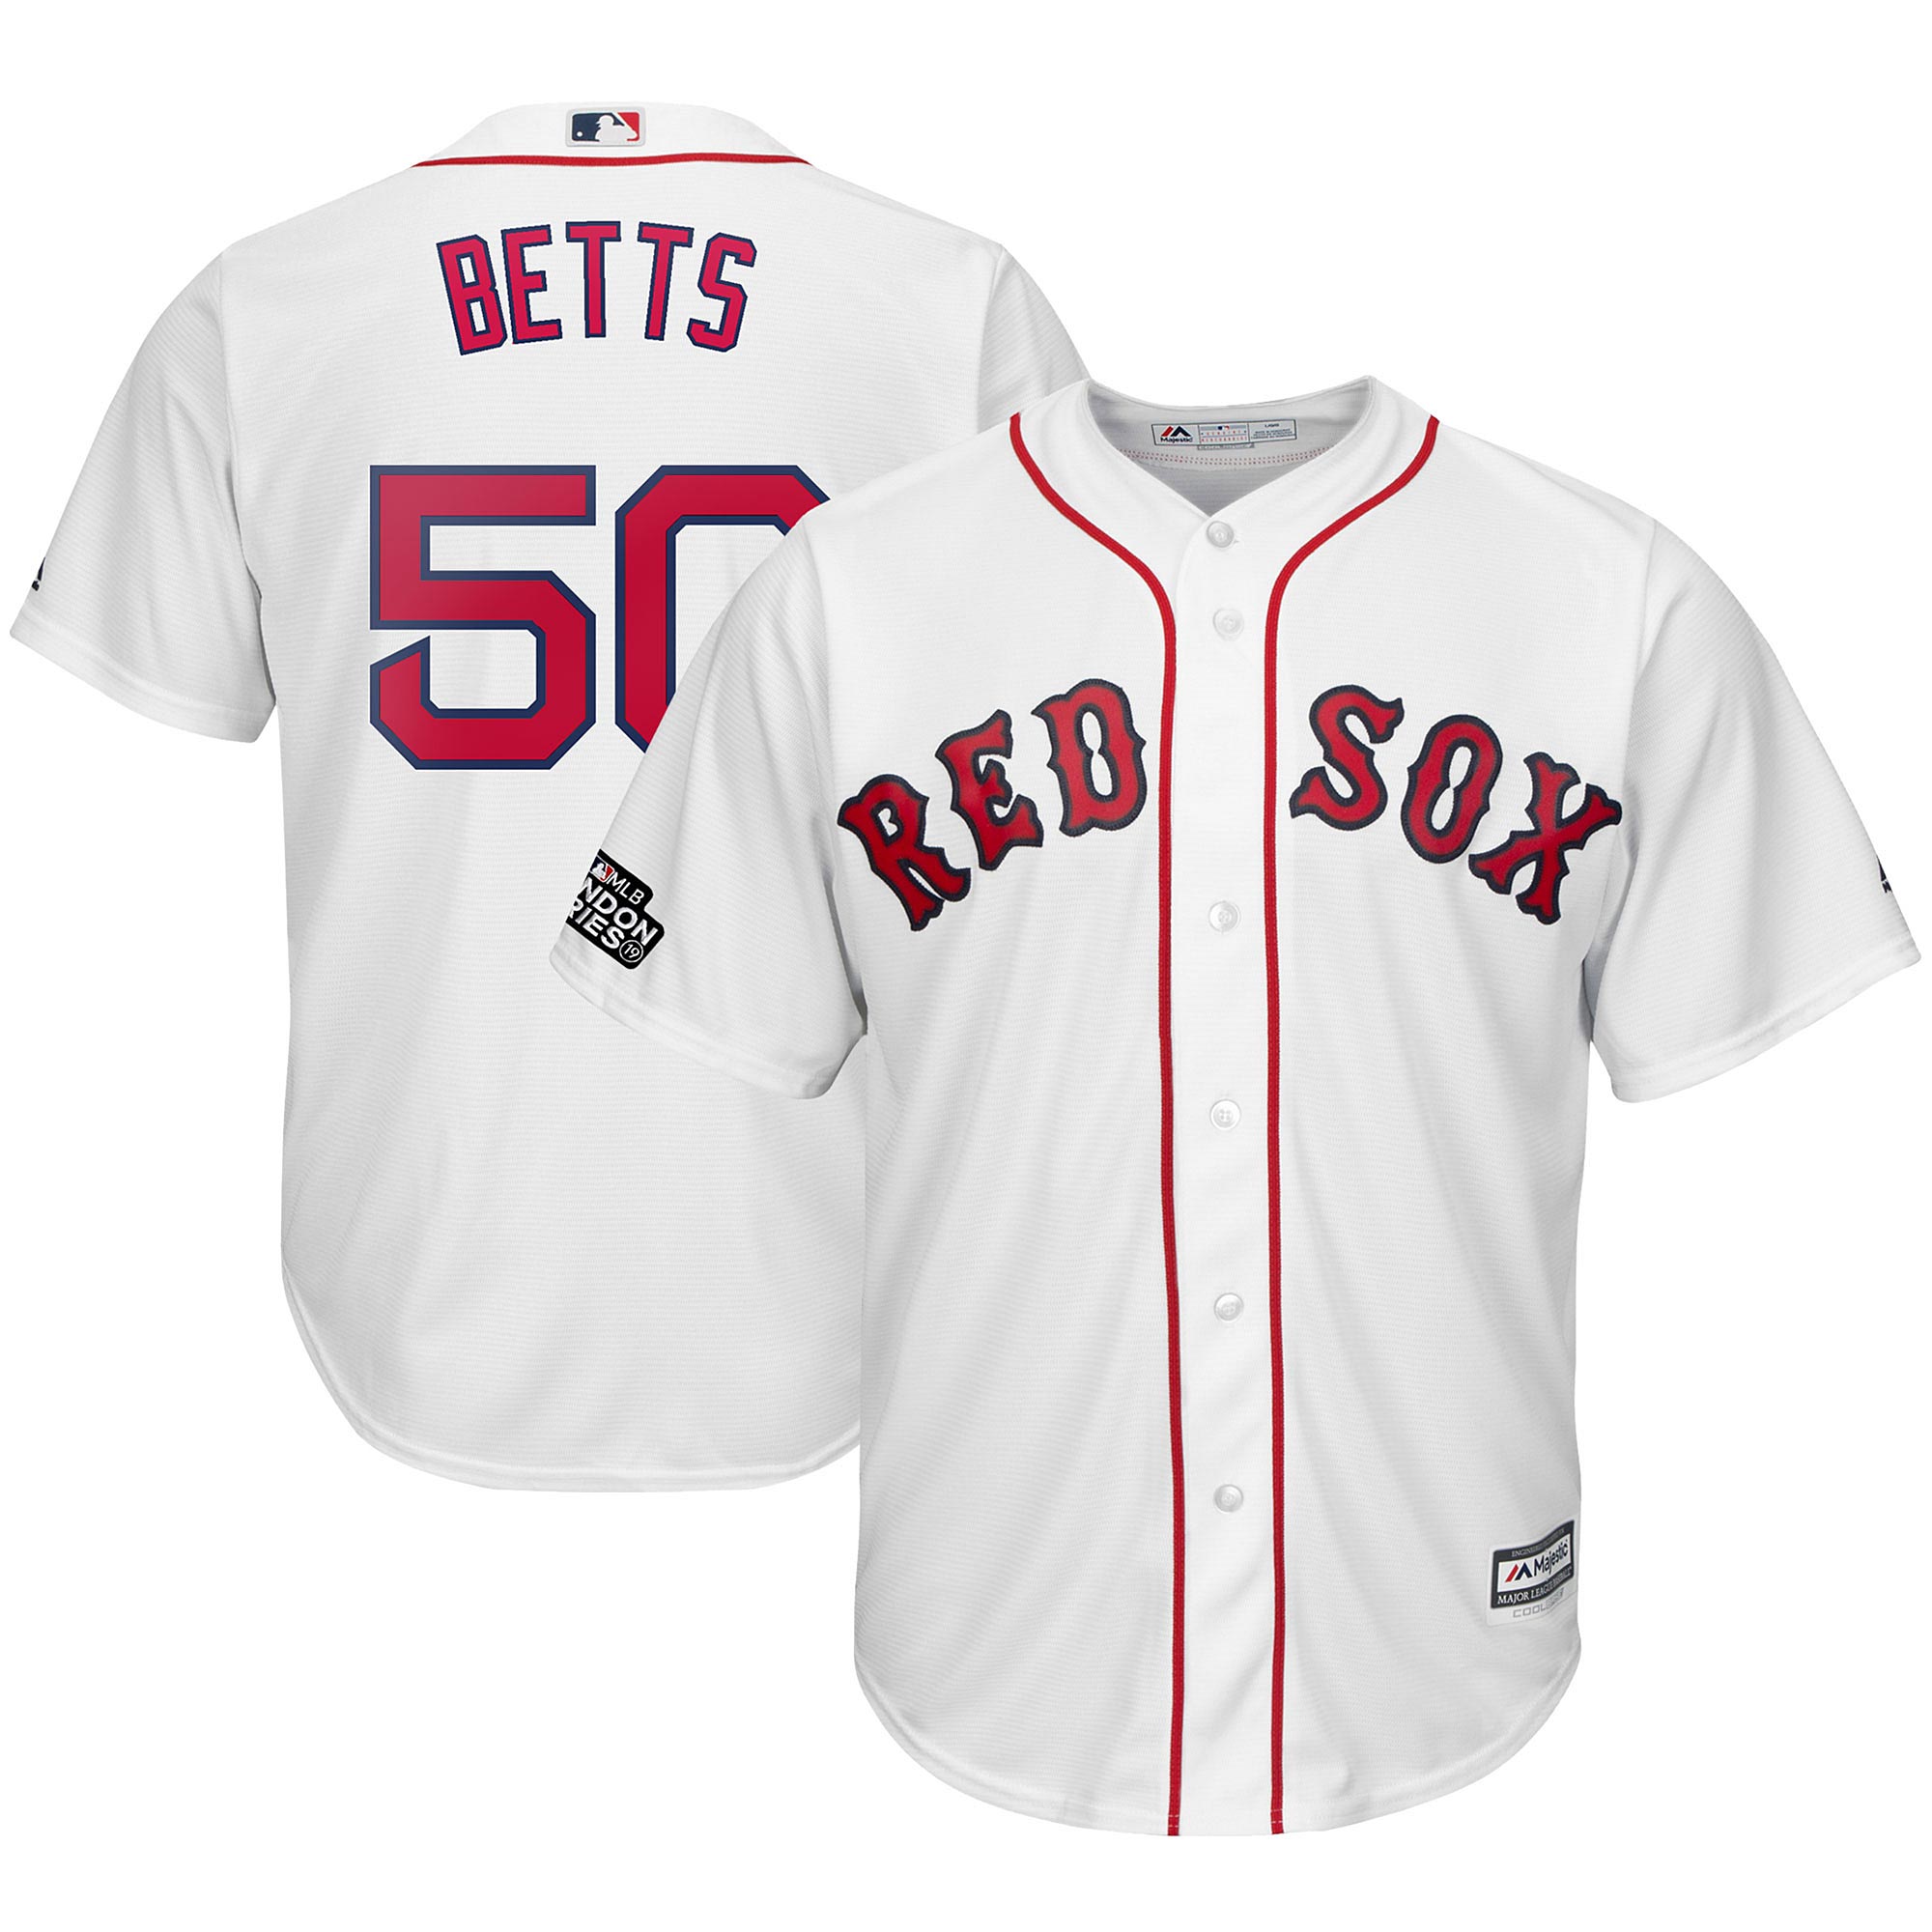 red sox jersey youth